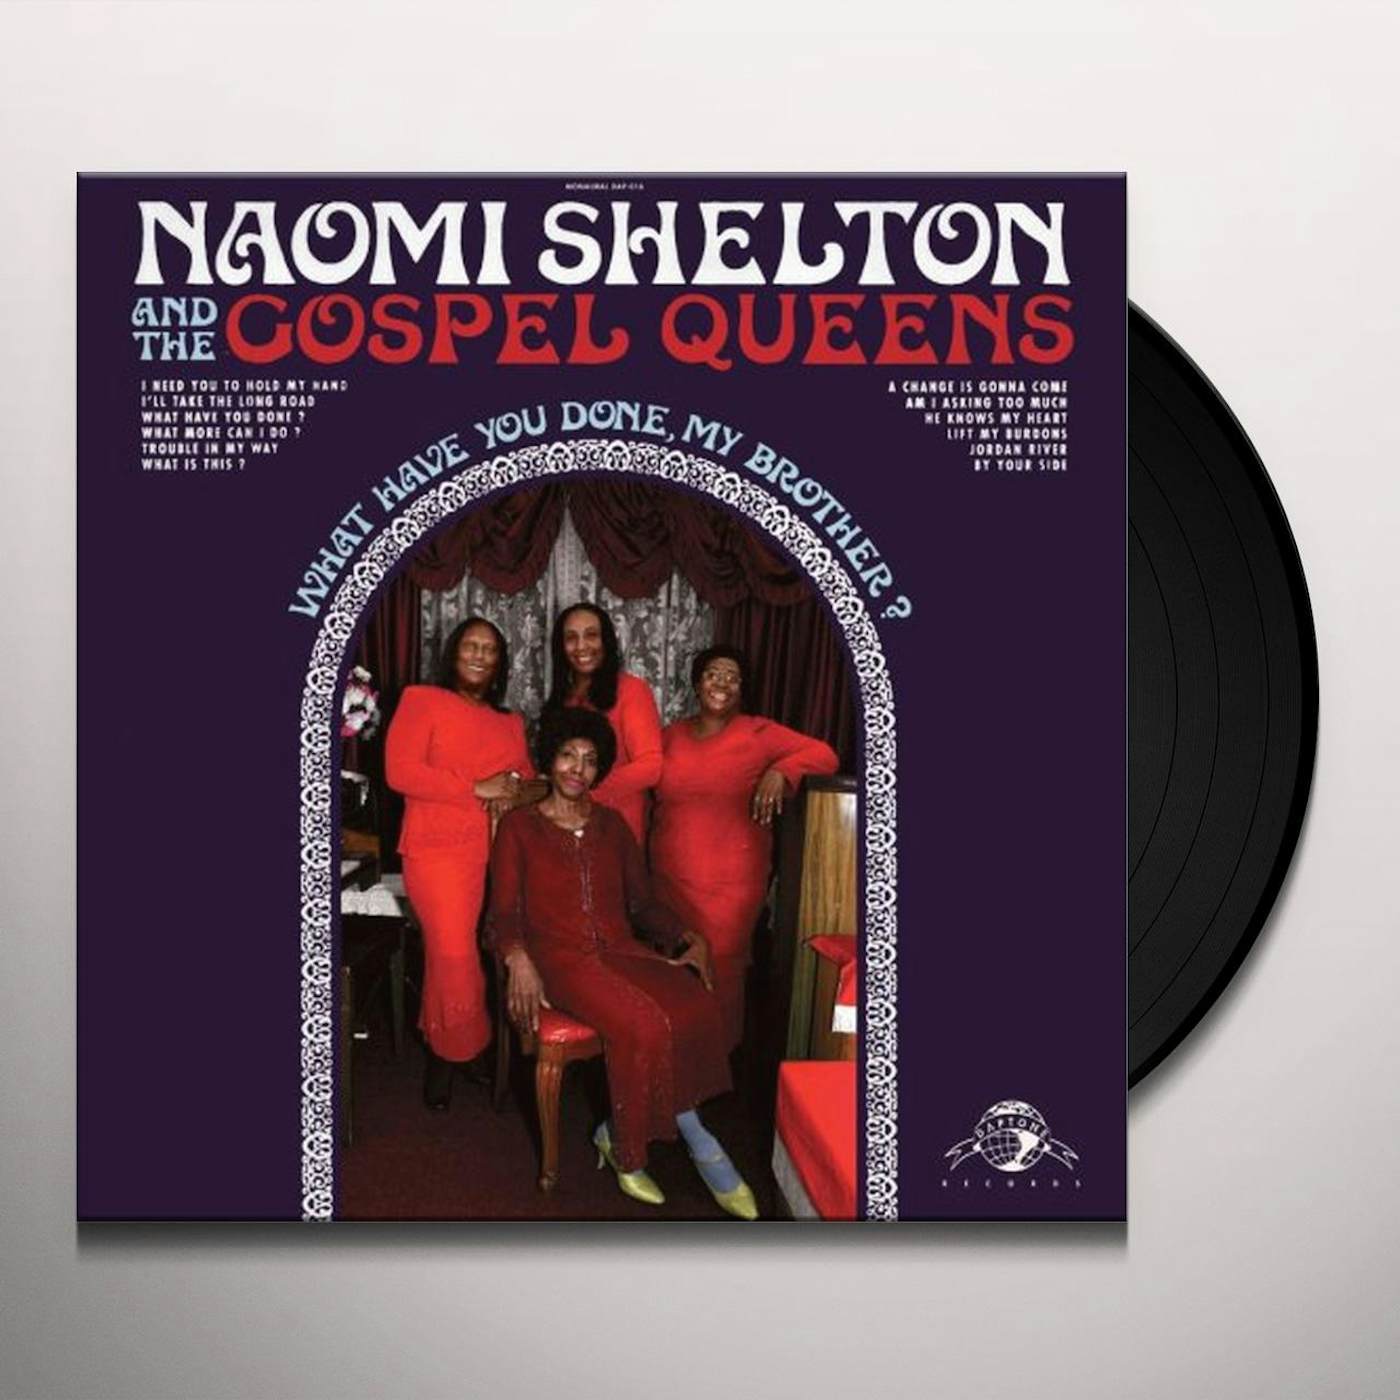 Naomi Shelton & the Gospel Queens WHAT HAVE YOU DONE MY BROTHER Vinyl Record